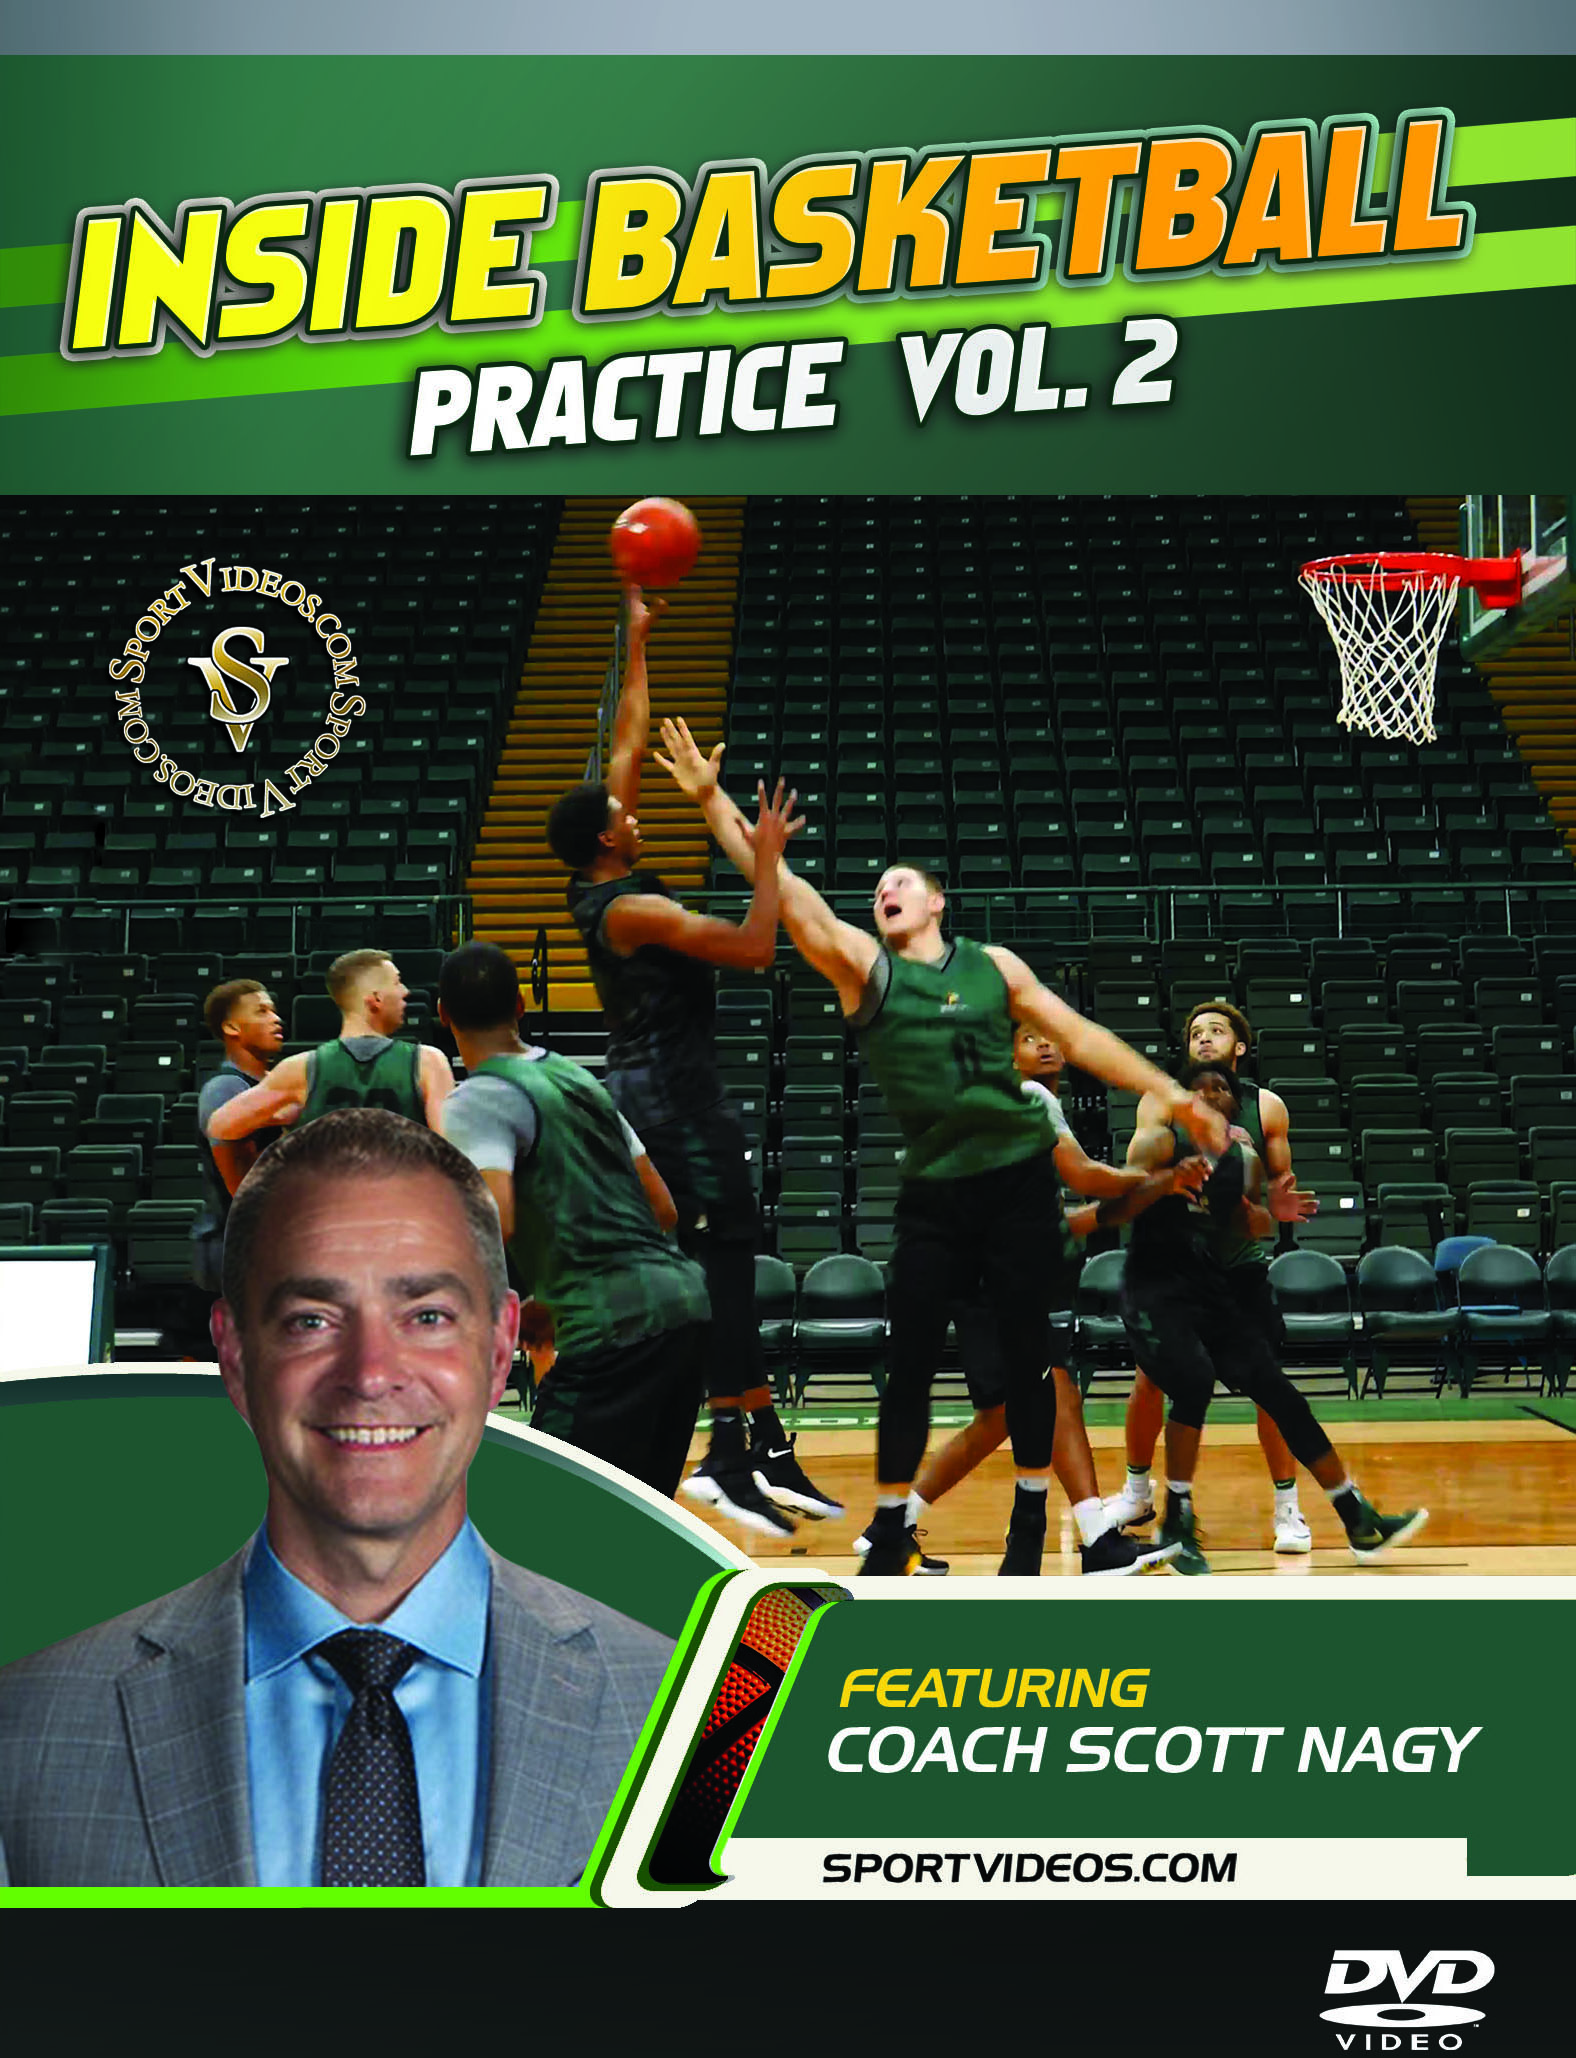 Inside Basketball Practice with Coach Scott Nagy Vol. 2 - DVD or Download - Free Shipping